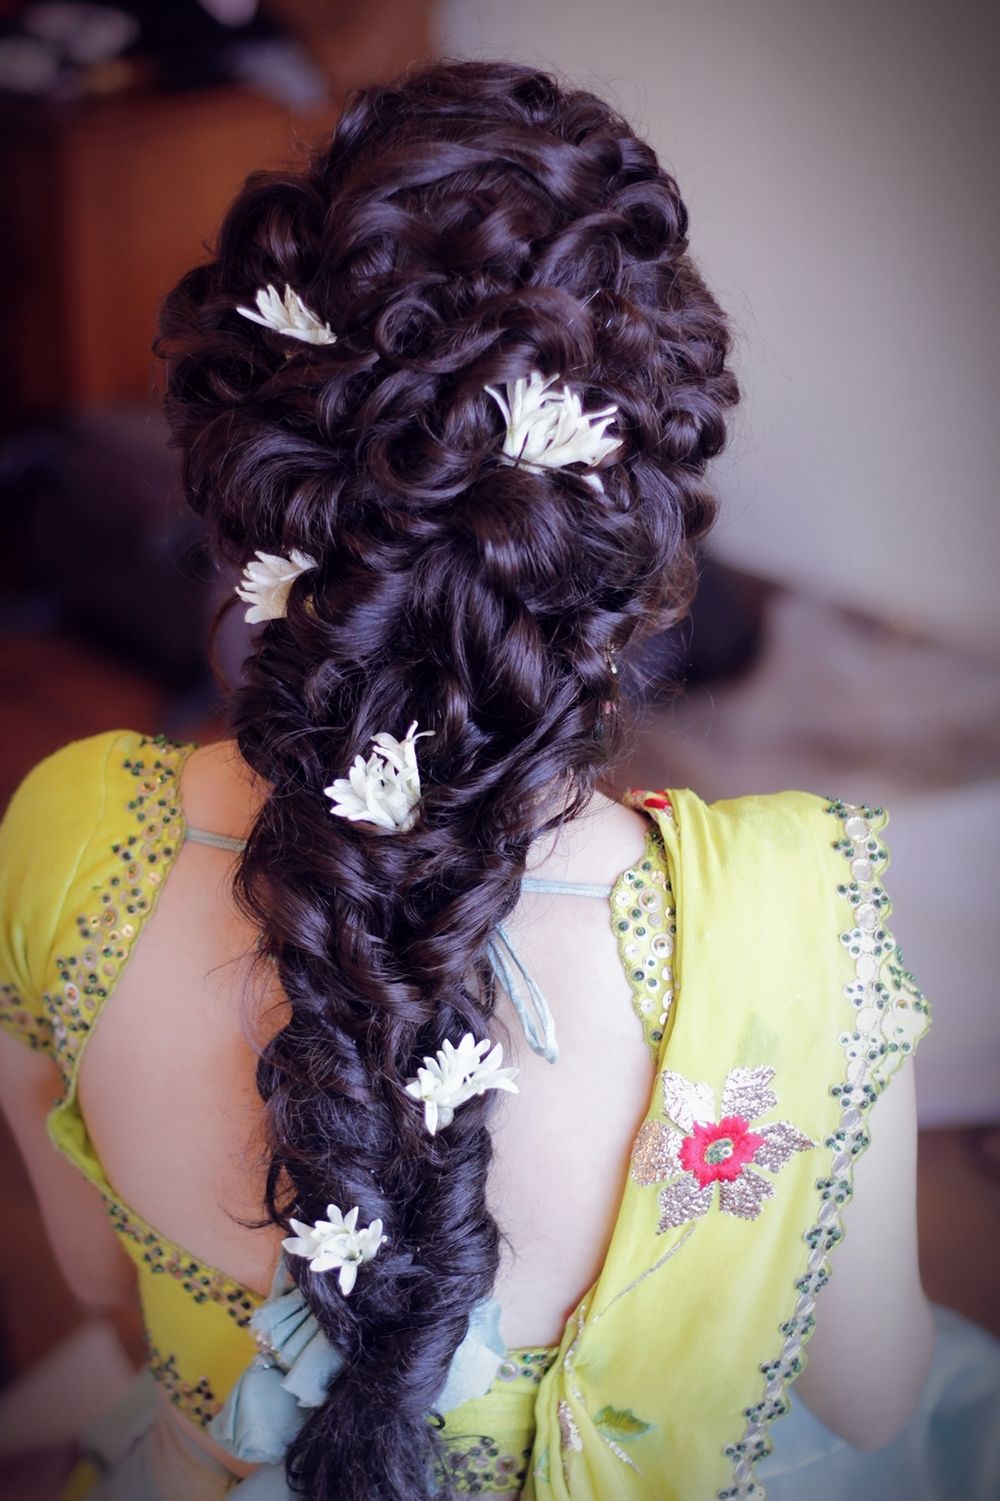 Photo of Twisty braid hairstyle with flowers for mehendi